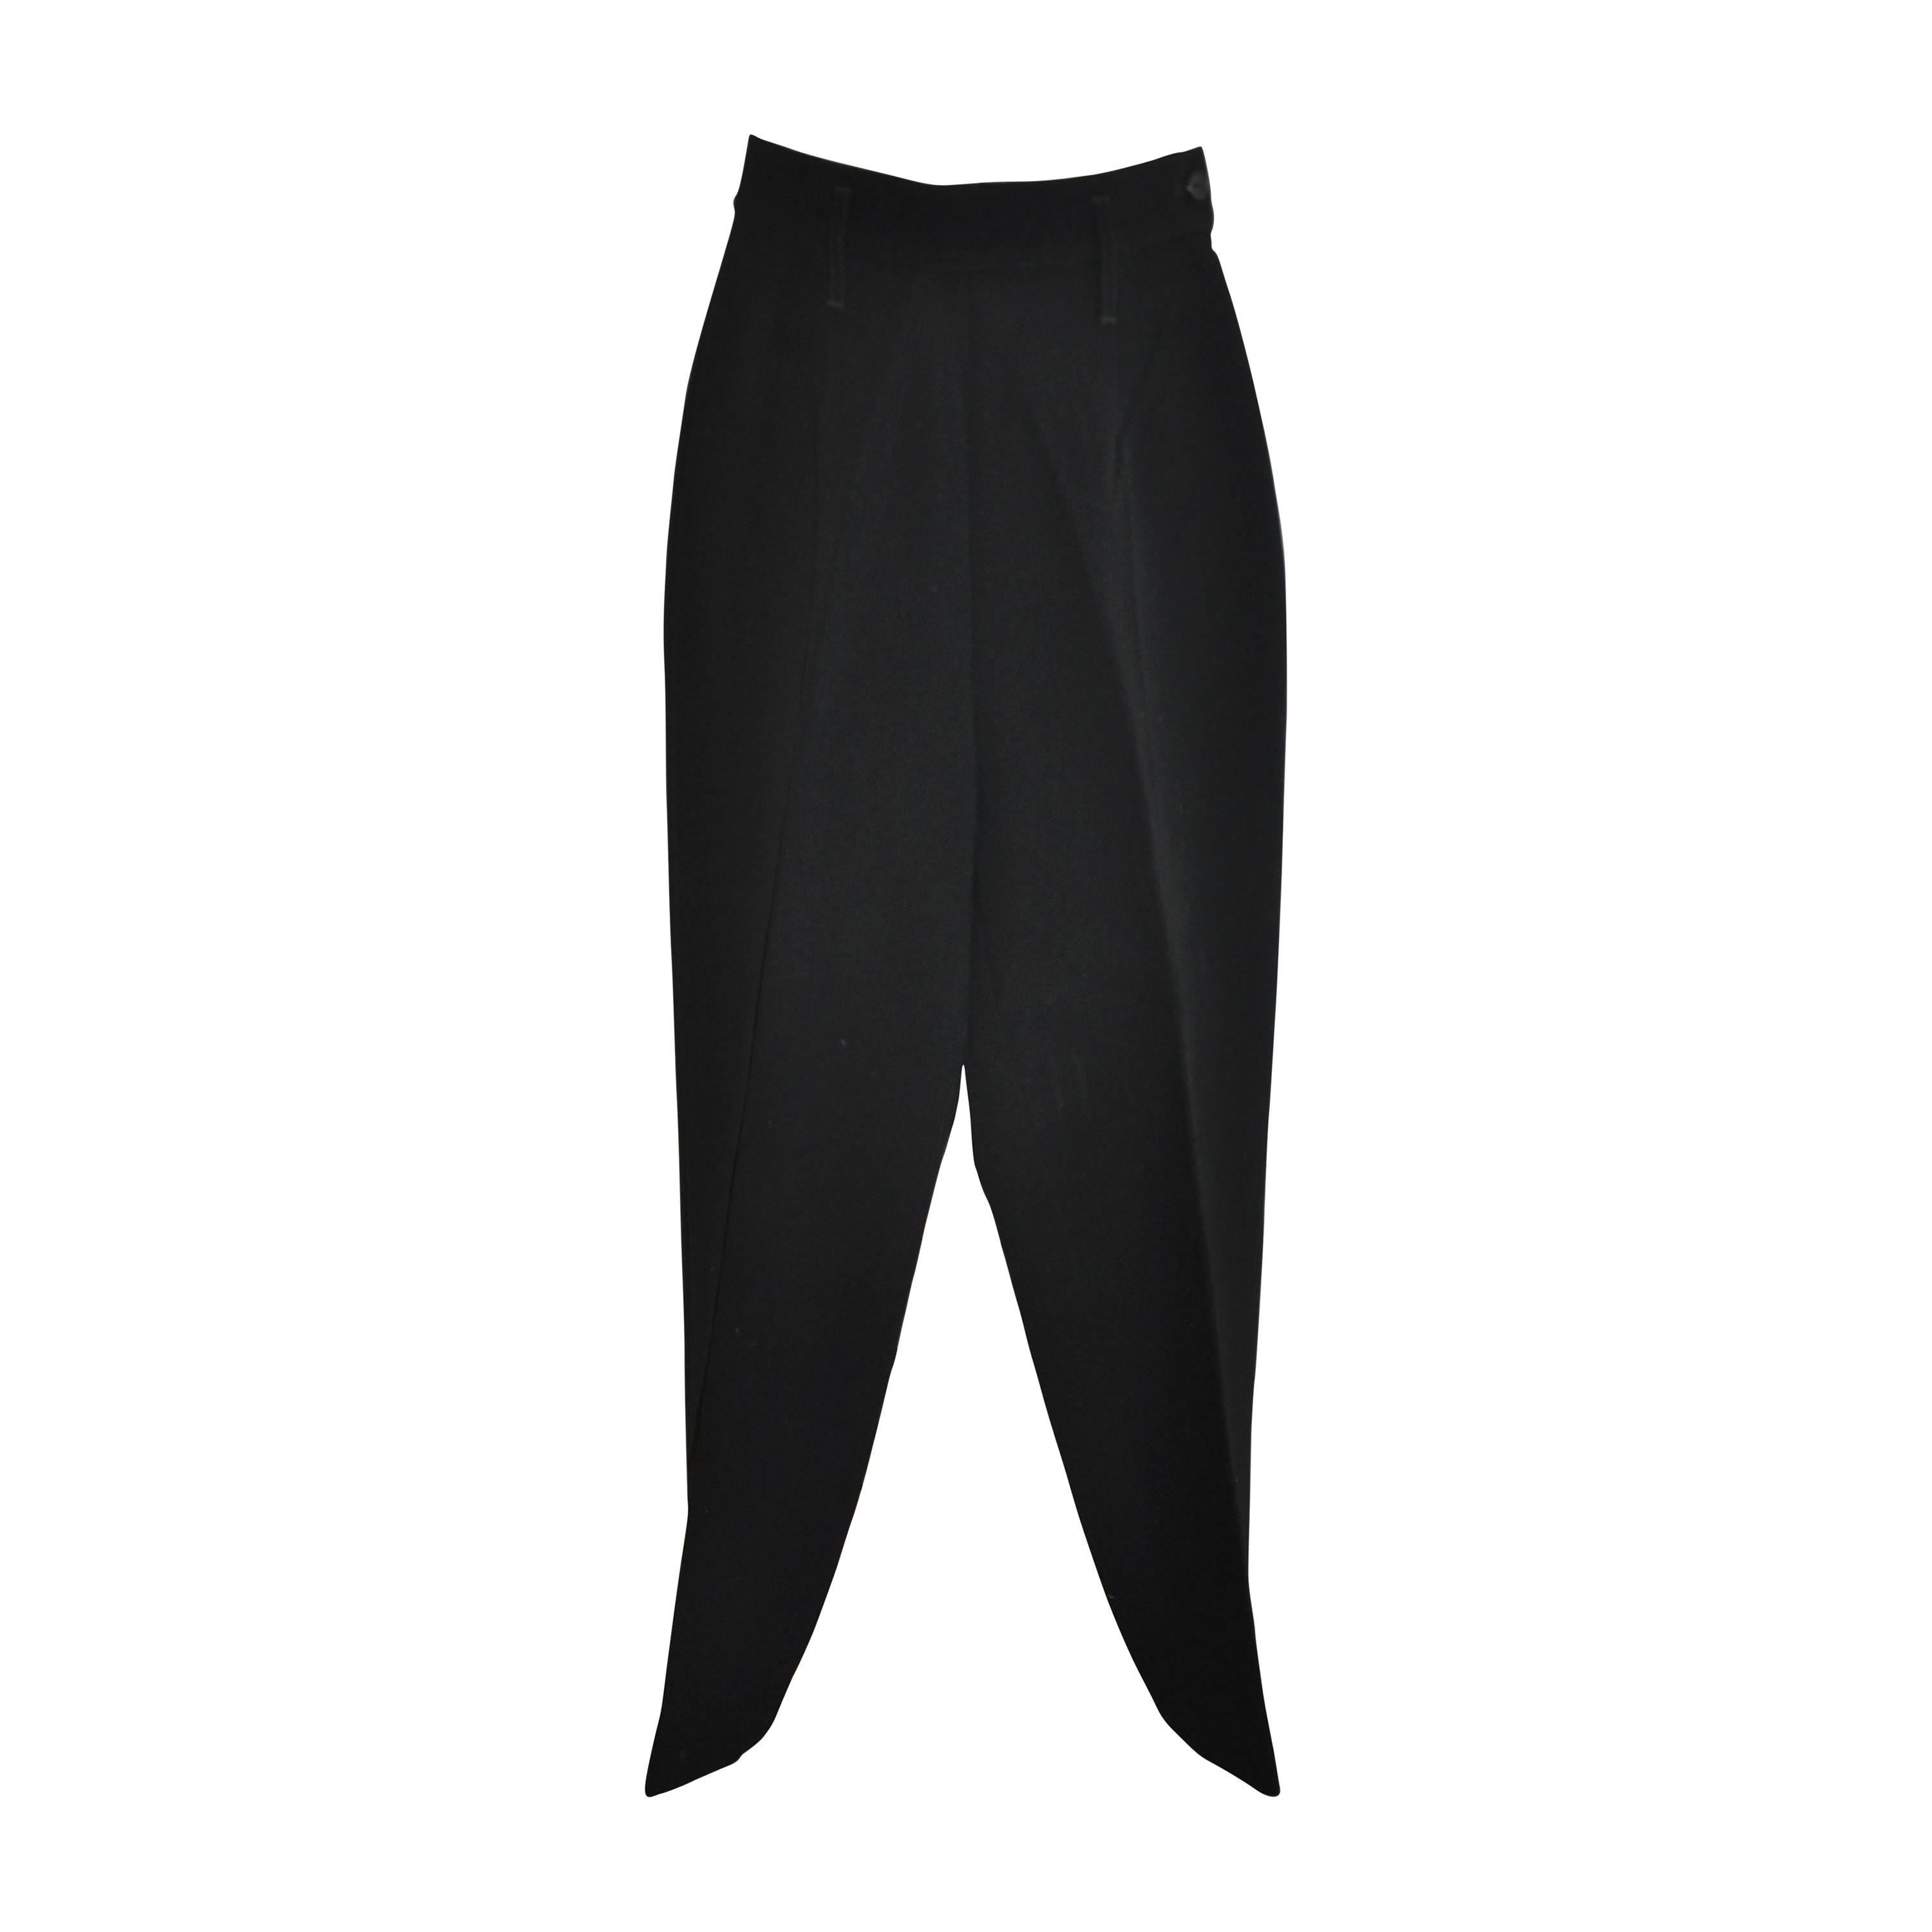 Jean Paul Gaultier Black Wool High-Waisted Trousers For Sale